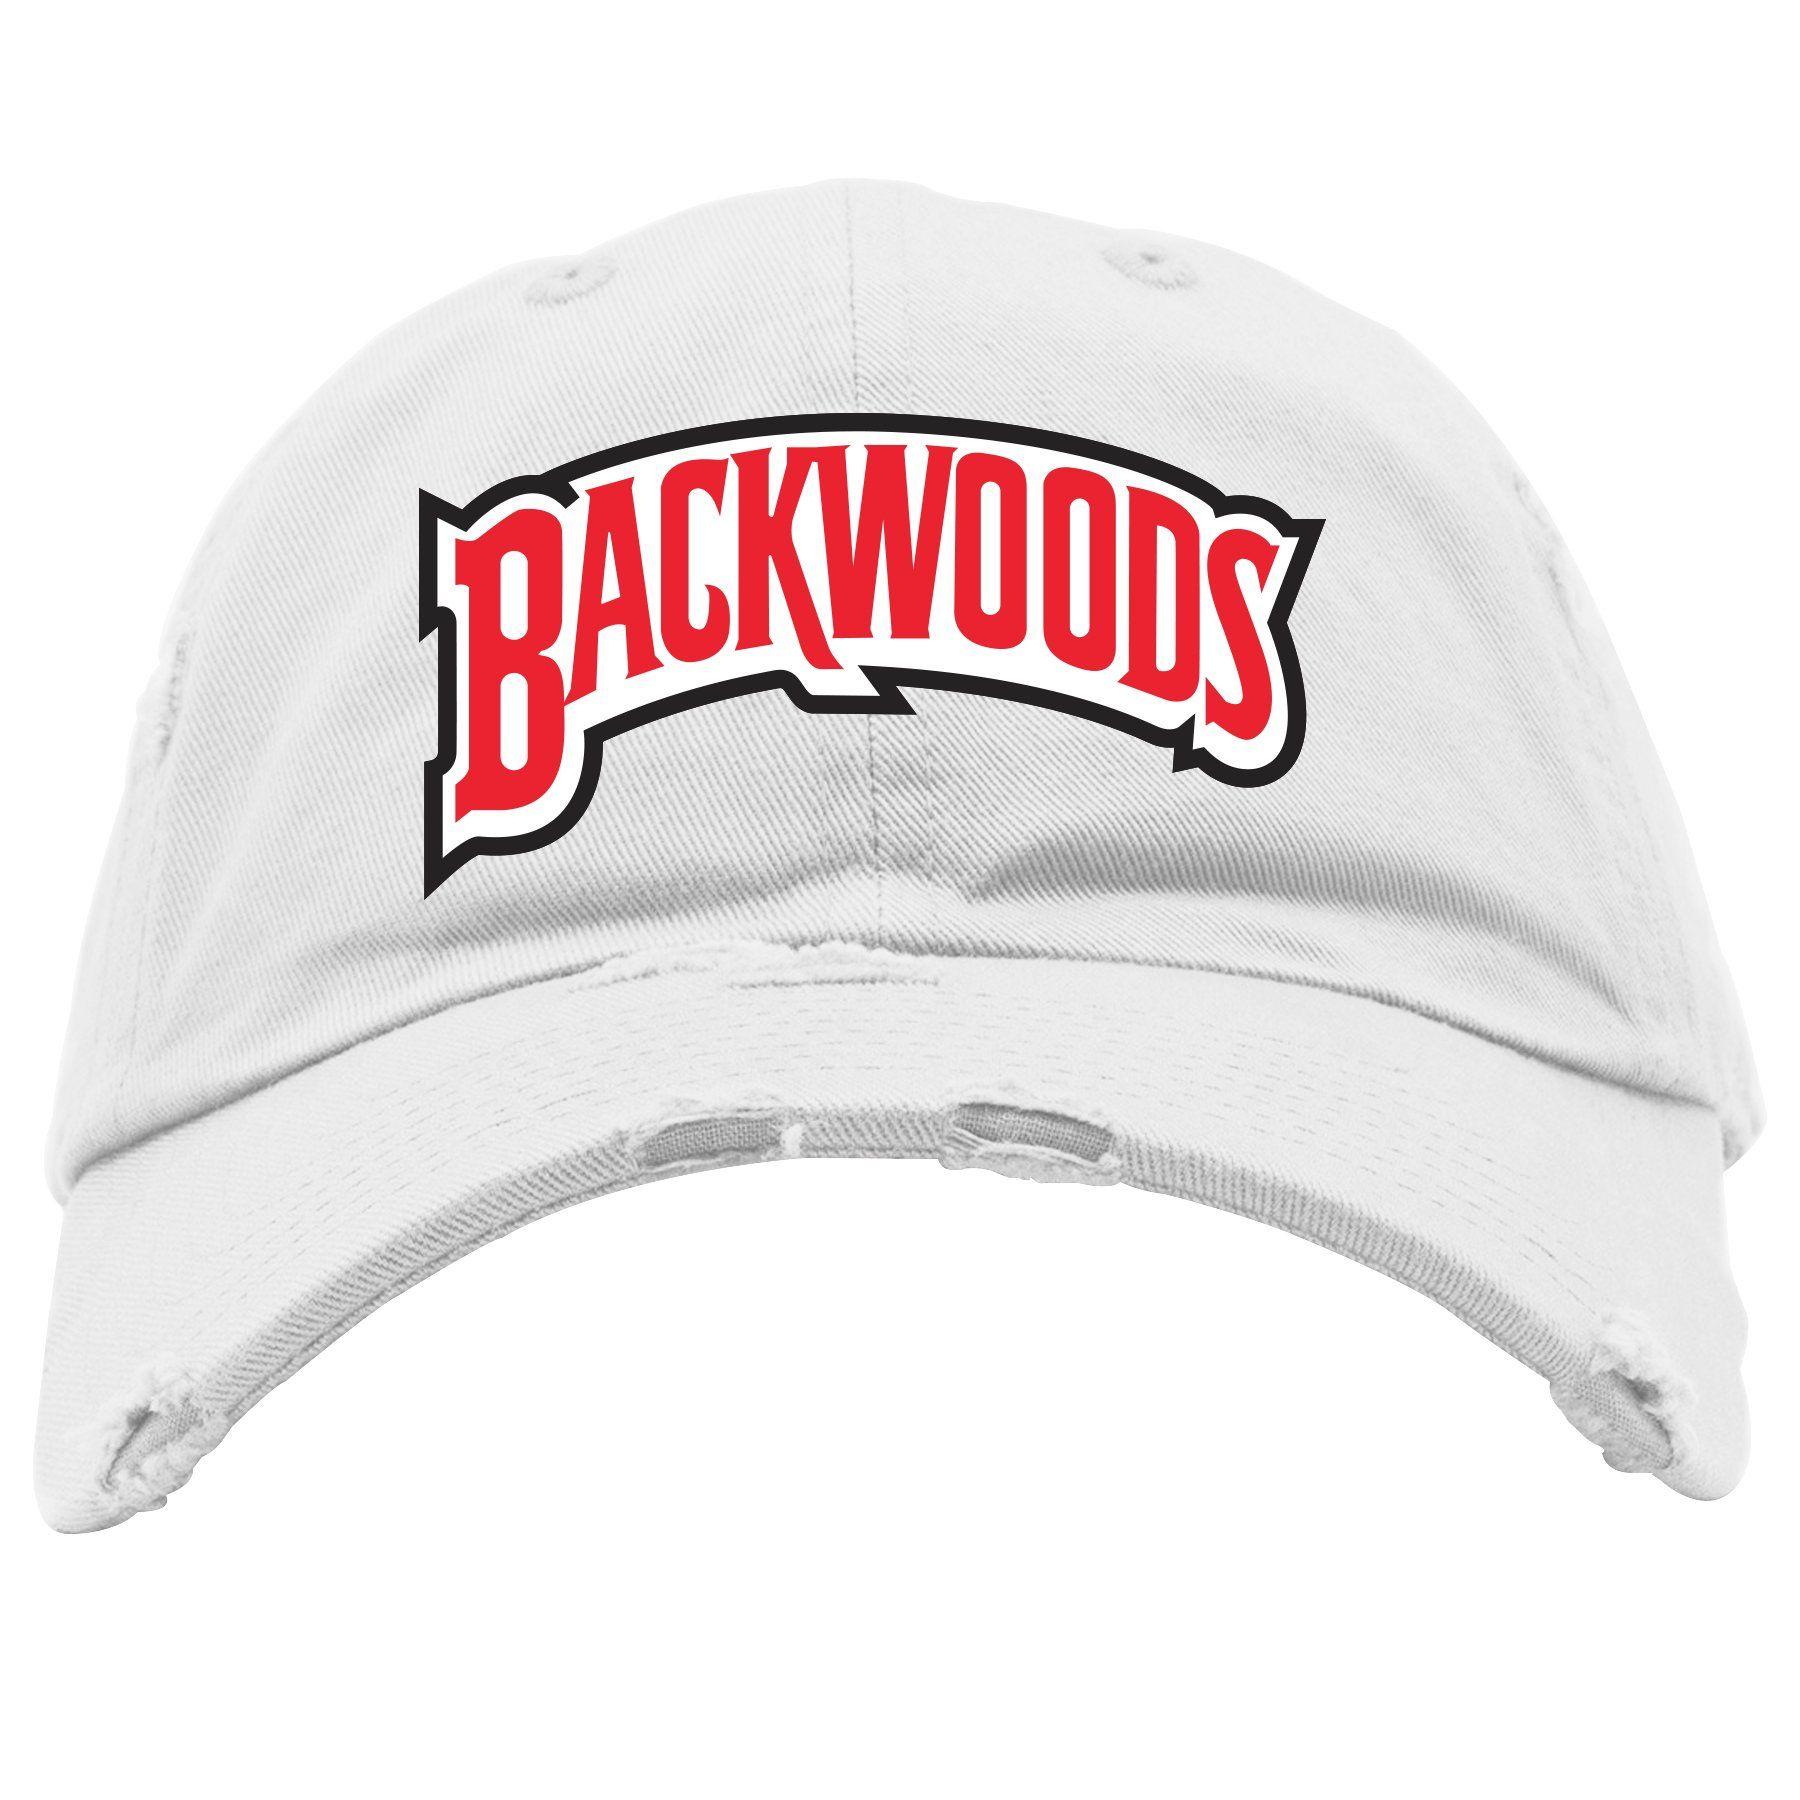 Backwoods Logo - Backwoods Russian Cream Cigars White Distressed Dad Hat – Cap Swag